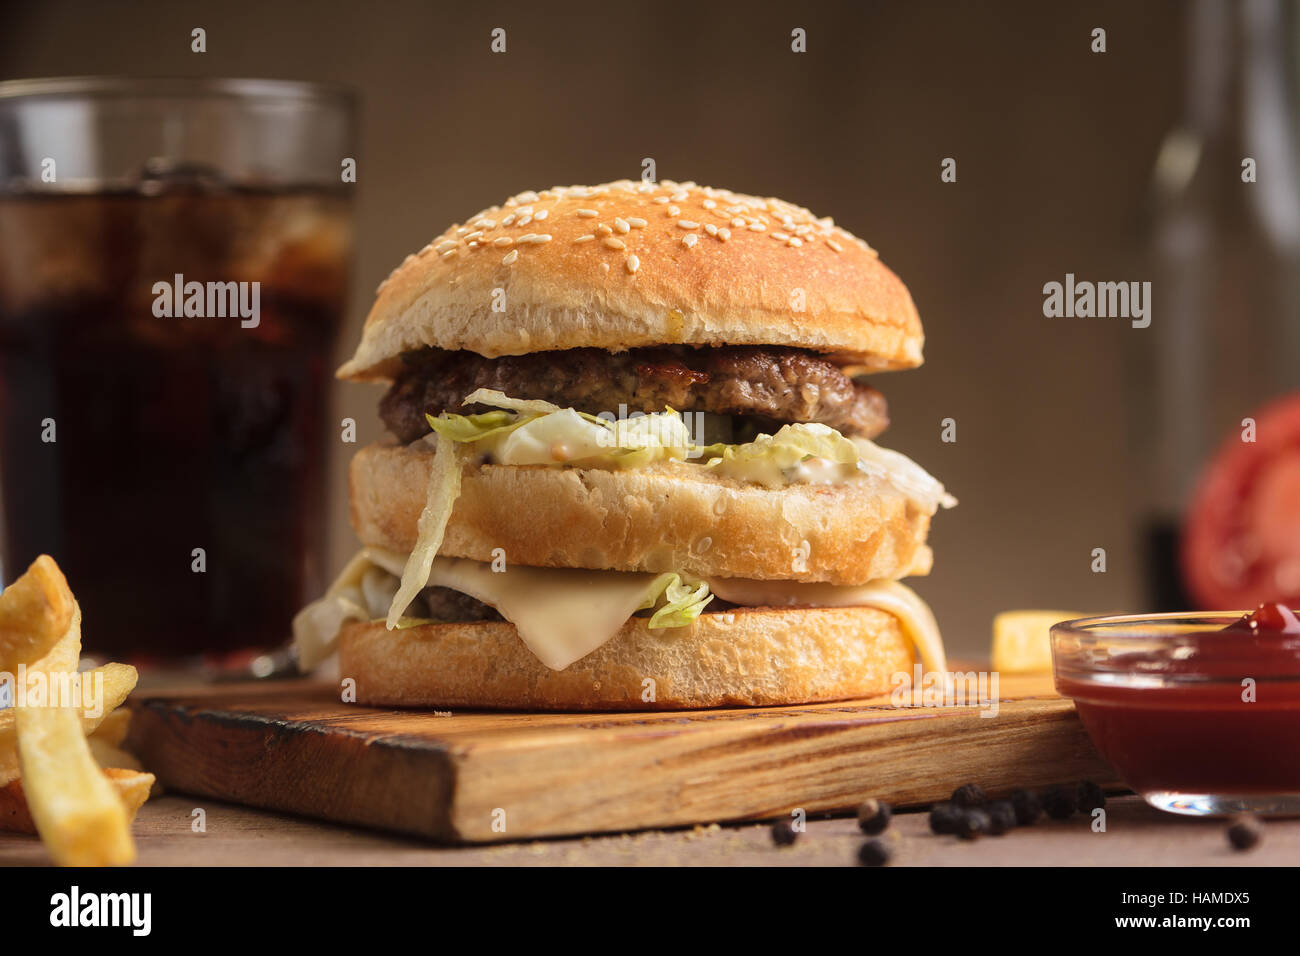 Concept: restaurant menus, healthy eating, homemade, gourmands, gluttony. Classic beef double burger with ingredients, drinks and french fries on mess Stock Photo